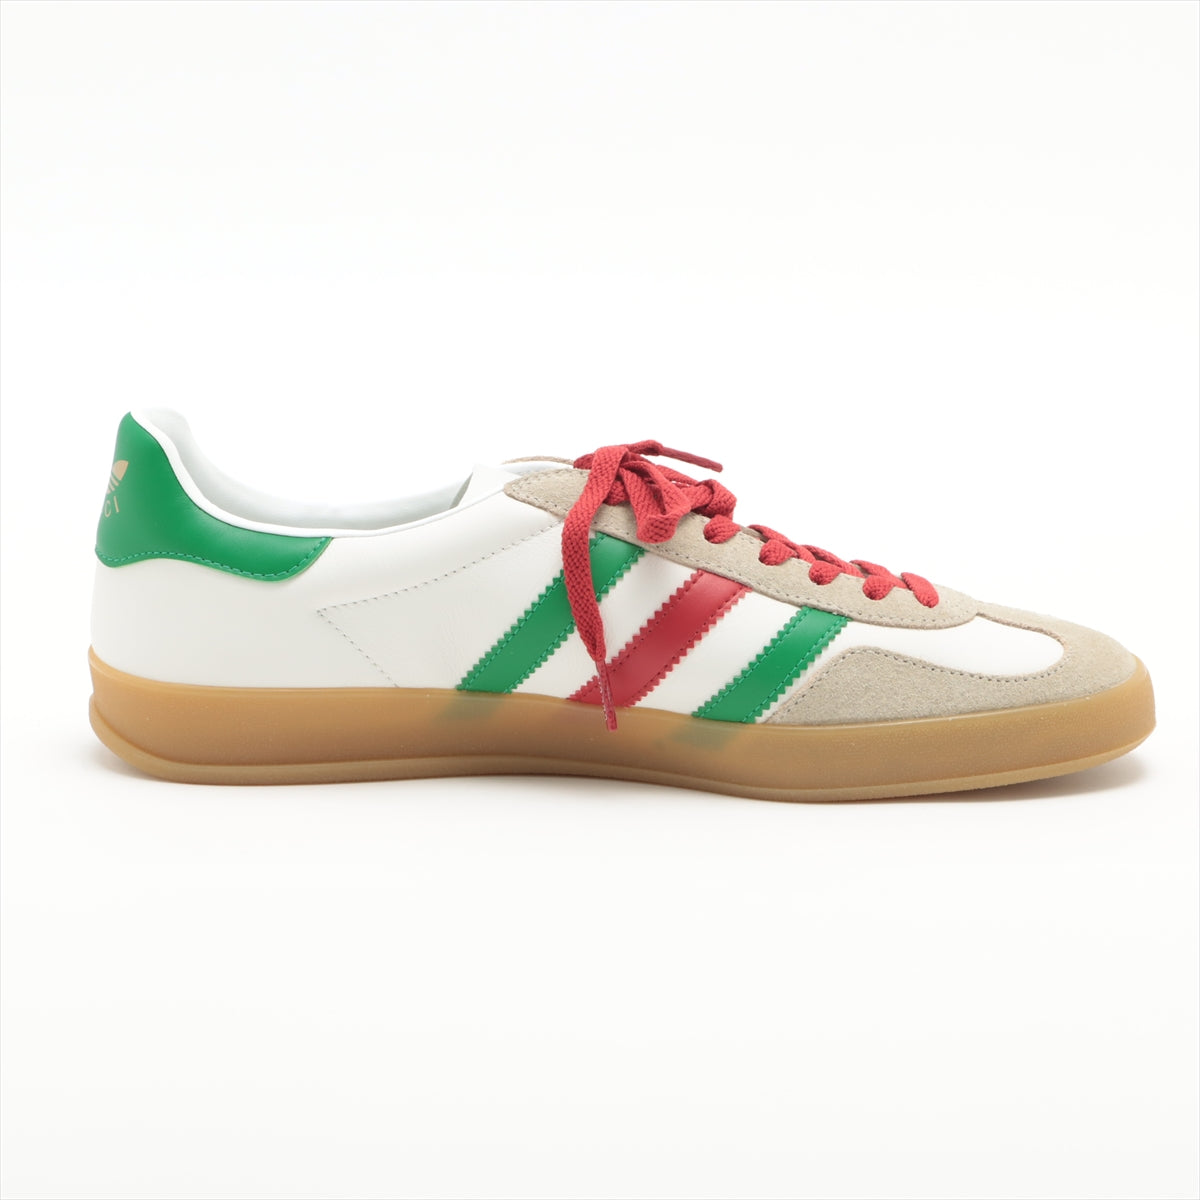 Gucci x adidas Gazelle Leather & Suede Sneakers 29cm Men's White 646652 Is there a replacement string